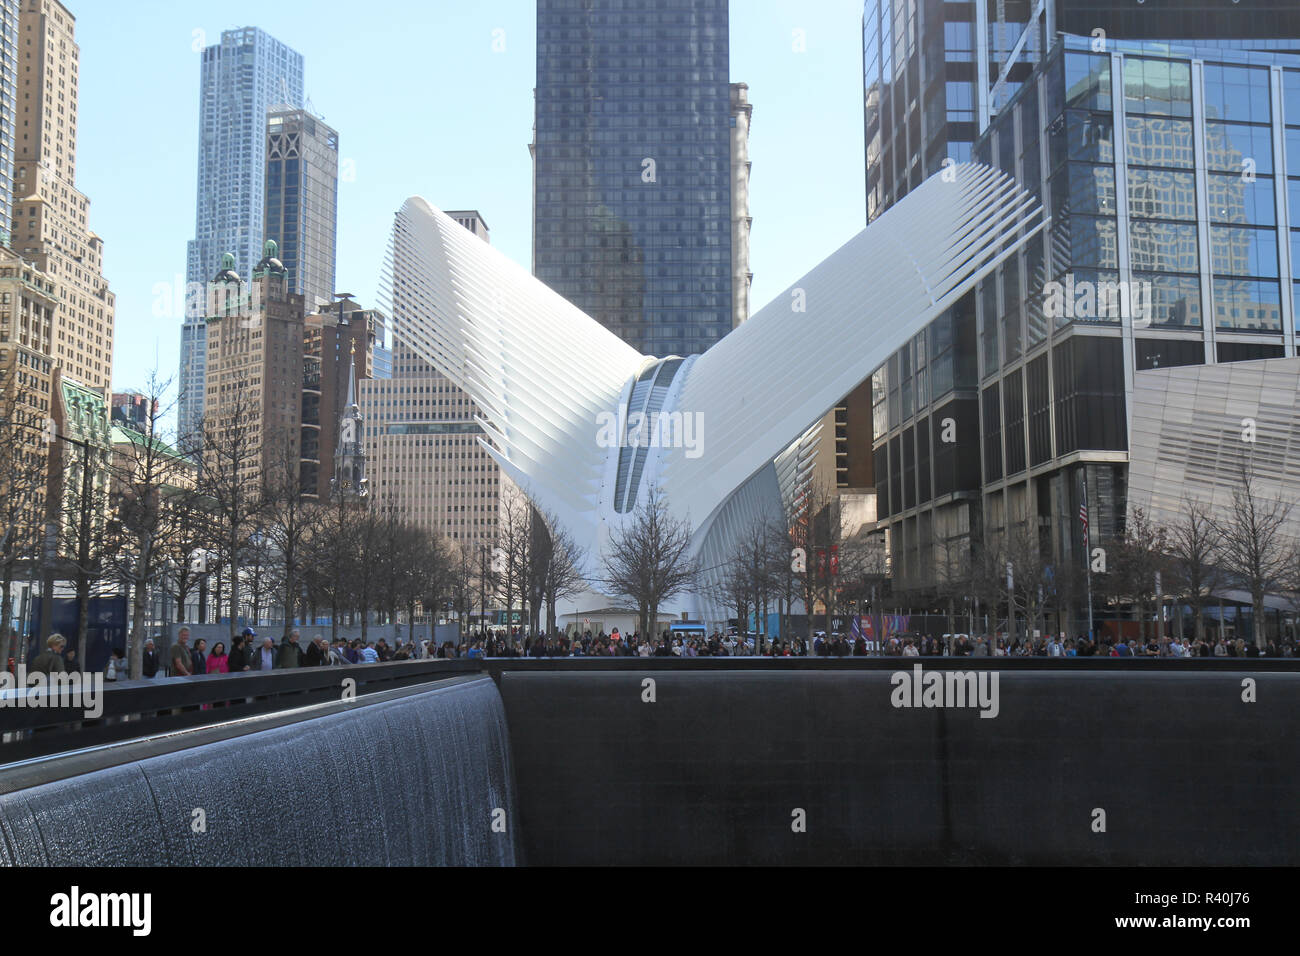 The National September 11 Memorial Museum (white structure) seen from across one of the pools of the National September 11 Memorial, New York, USA Stock Photo